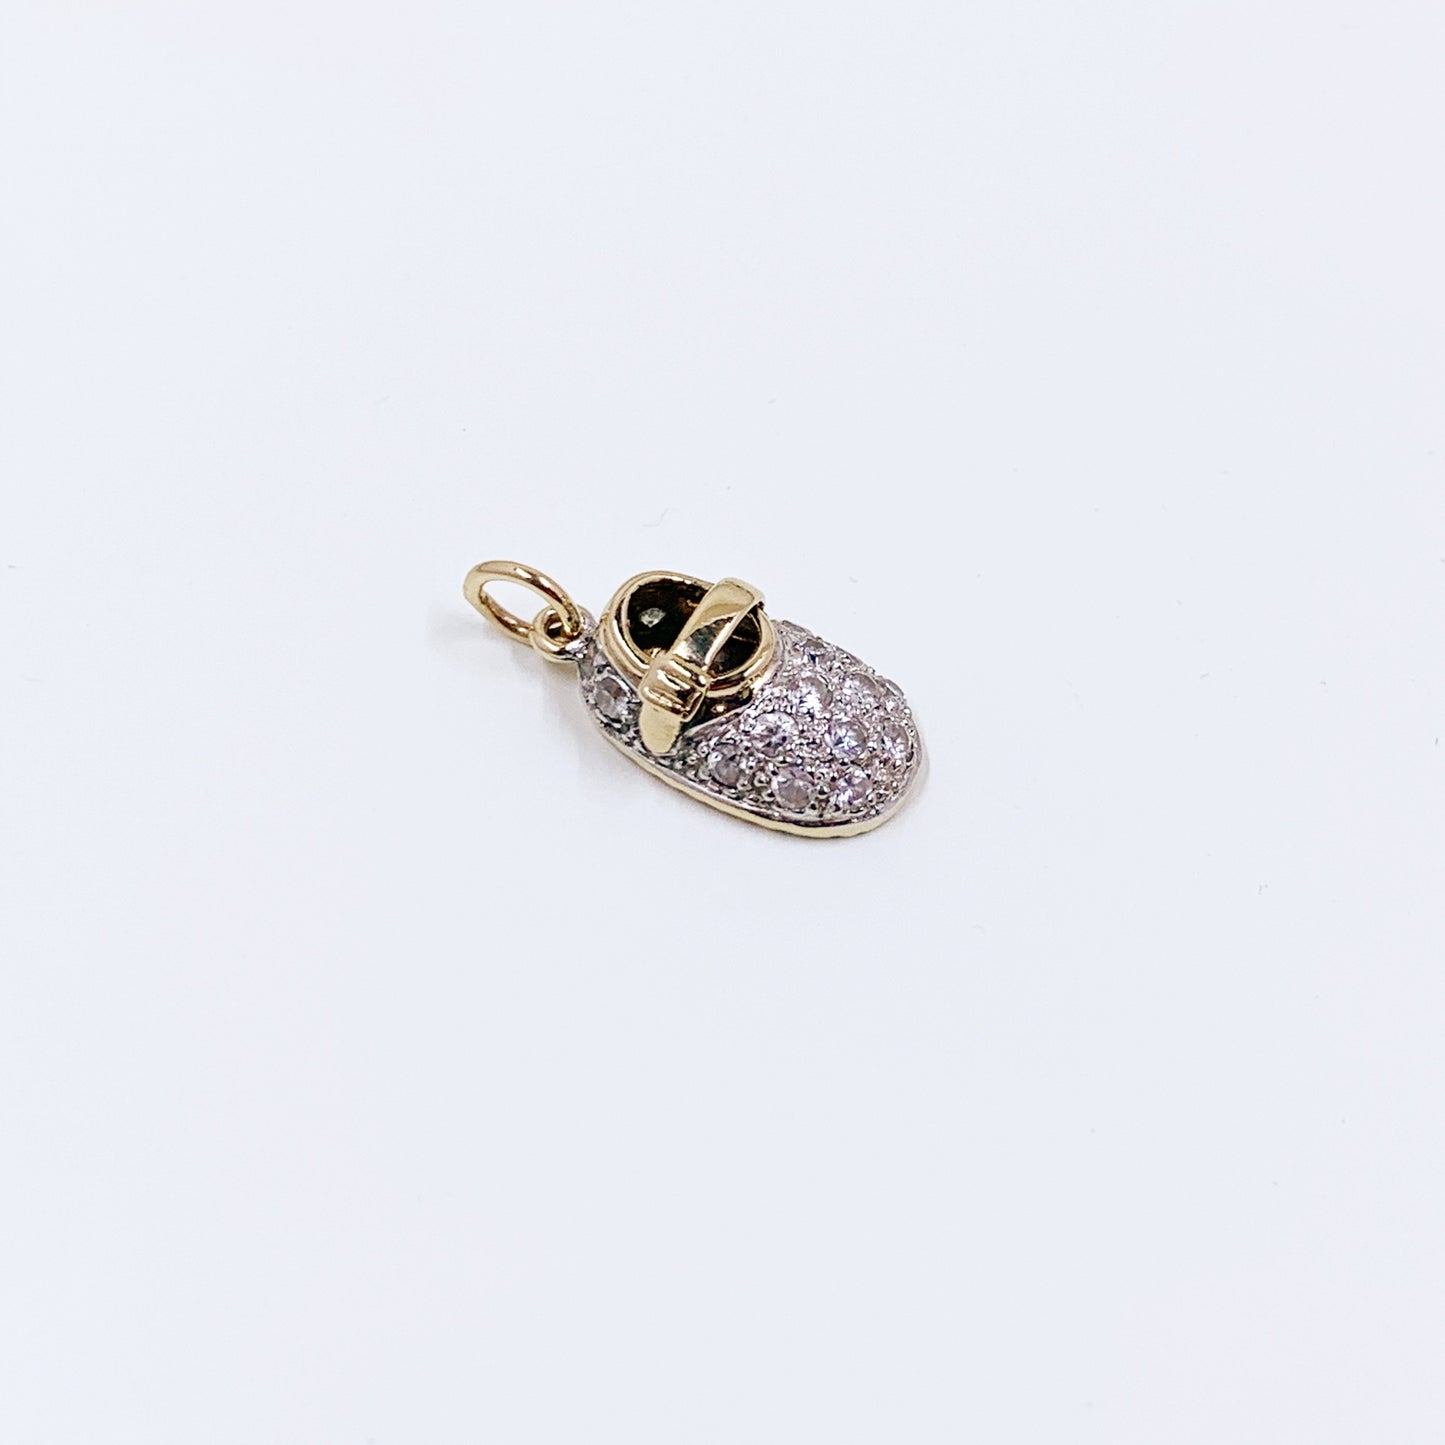 14k Gold Baby Shoe Charm | 14K Gold Baby Bootie Charm | 14k Diamond Simulant Baby Shoe Charm, Baby Gift | Mothers Gift